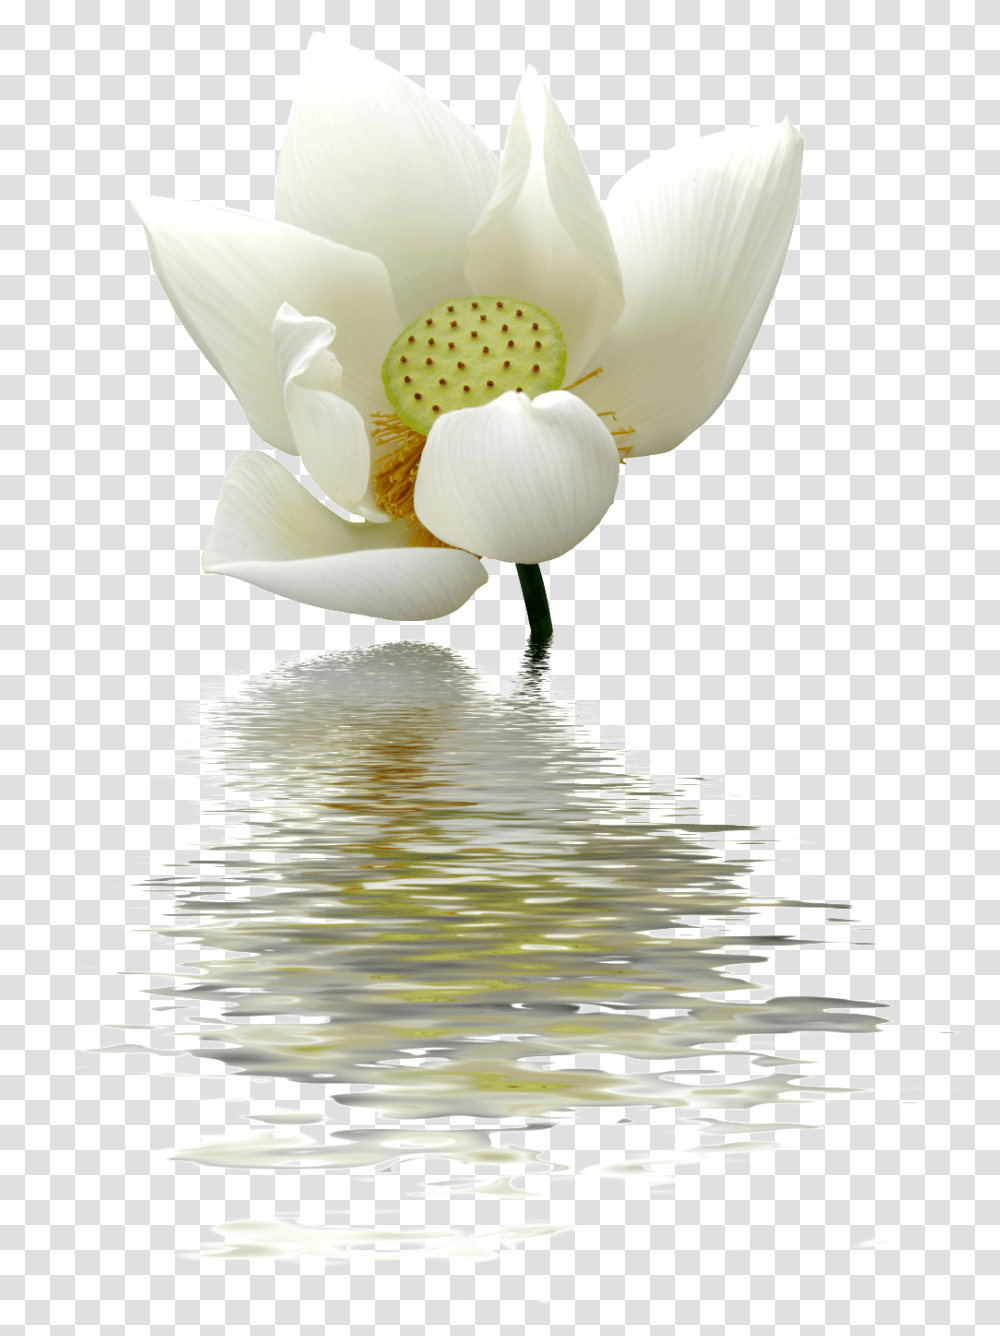 Download A Lotus Flower Lotus Cecilia Sfalsin Frases Bom Dia, Plant, Blossom, Lily, Pond Lily Transparent Png